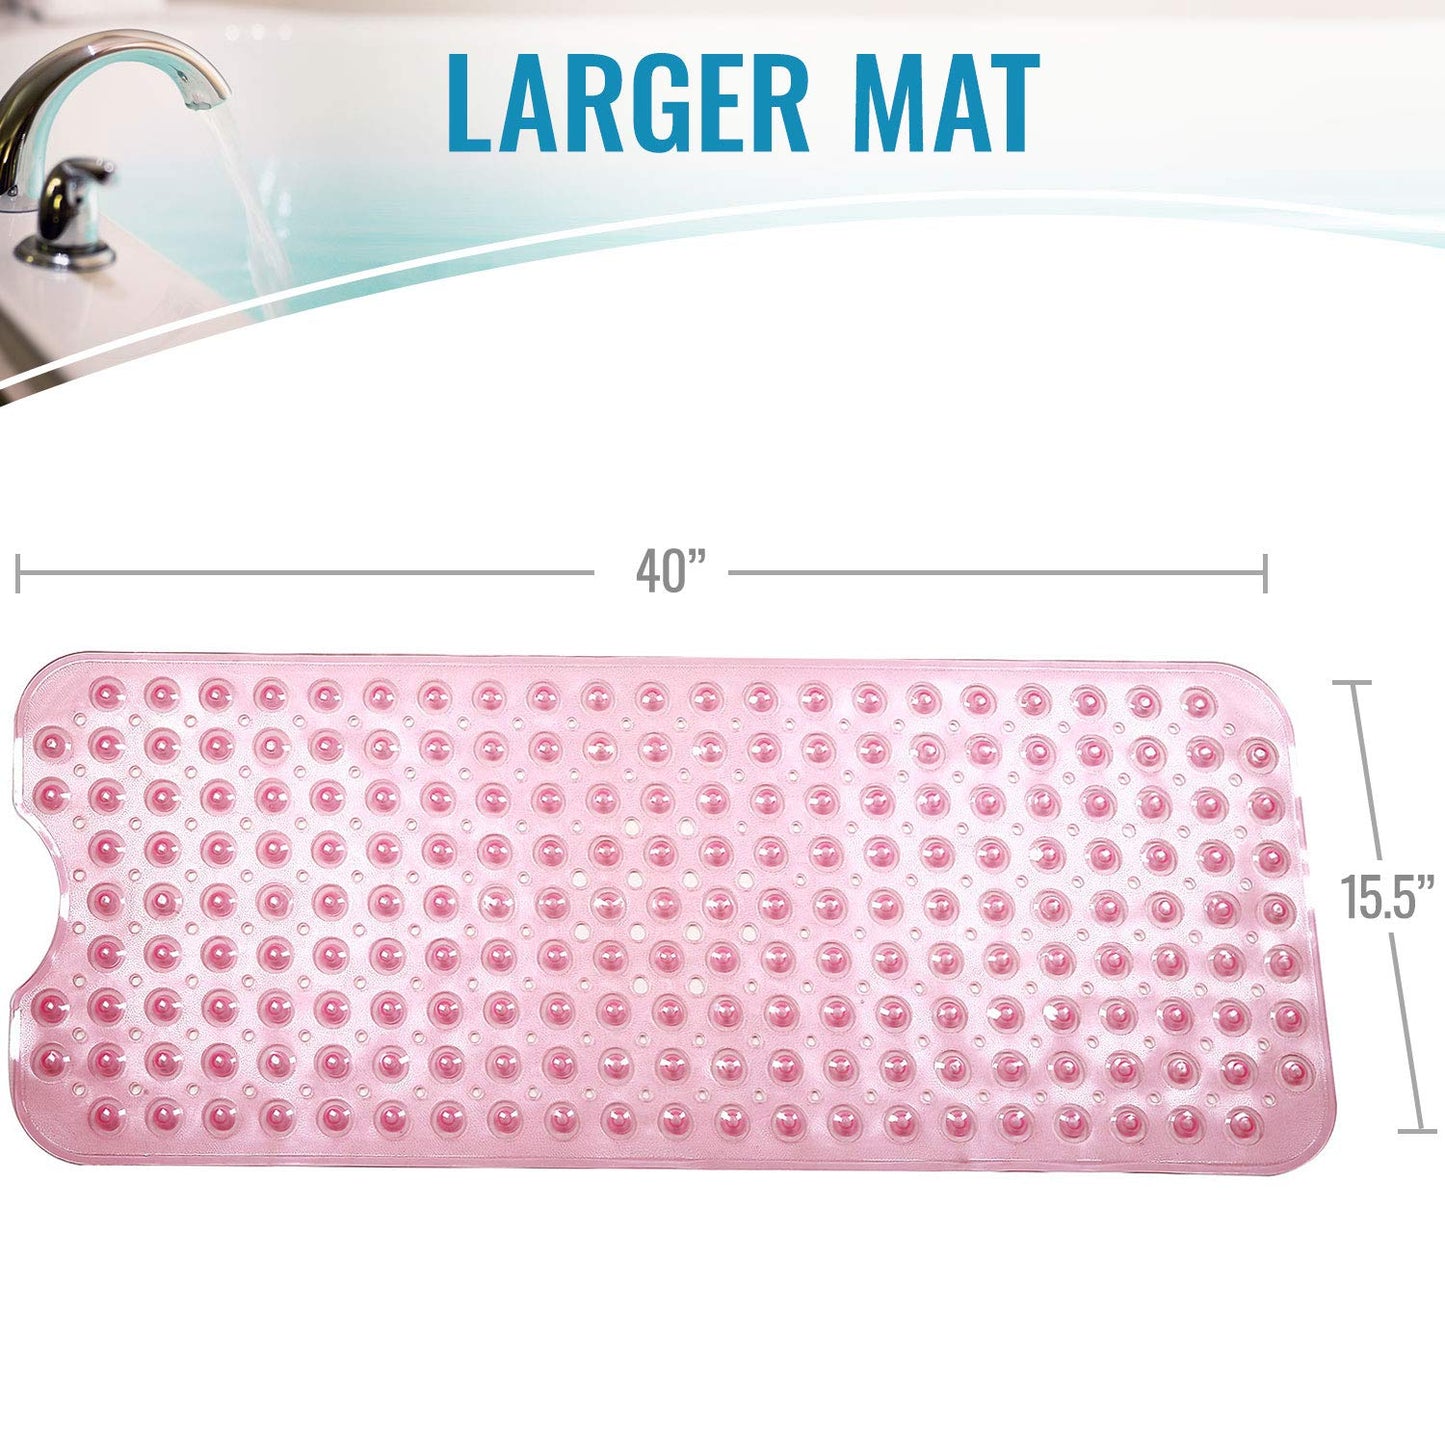 HealthSmart Antimicrobial Bath Mat with NonSlip Suctions and Drain Holes Extra Long, Translucent Pink, 1 Count